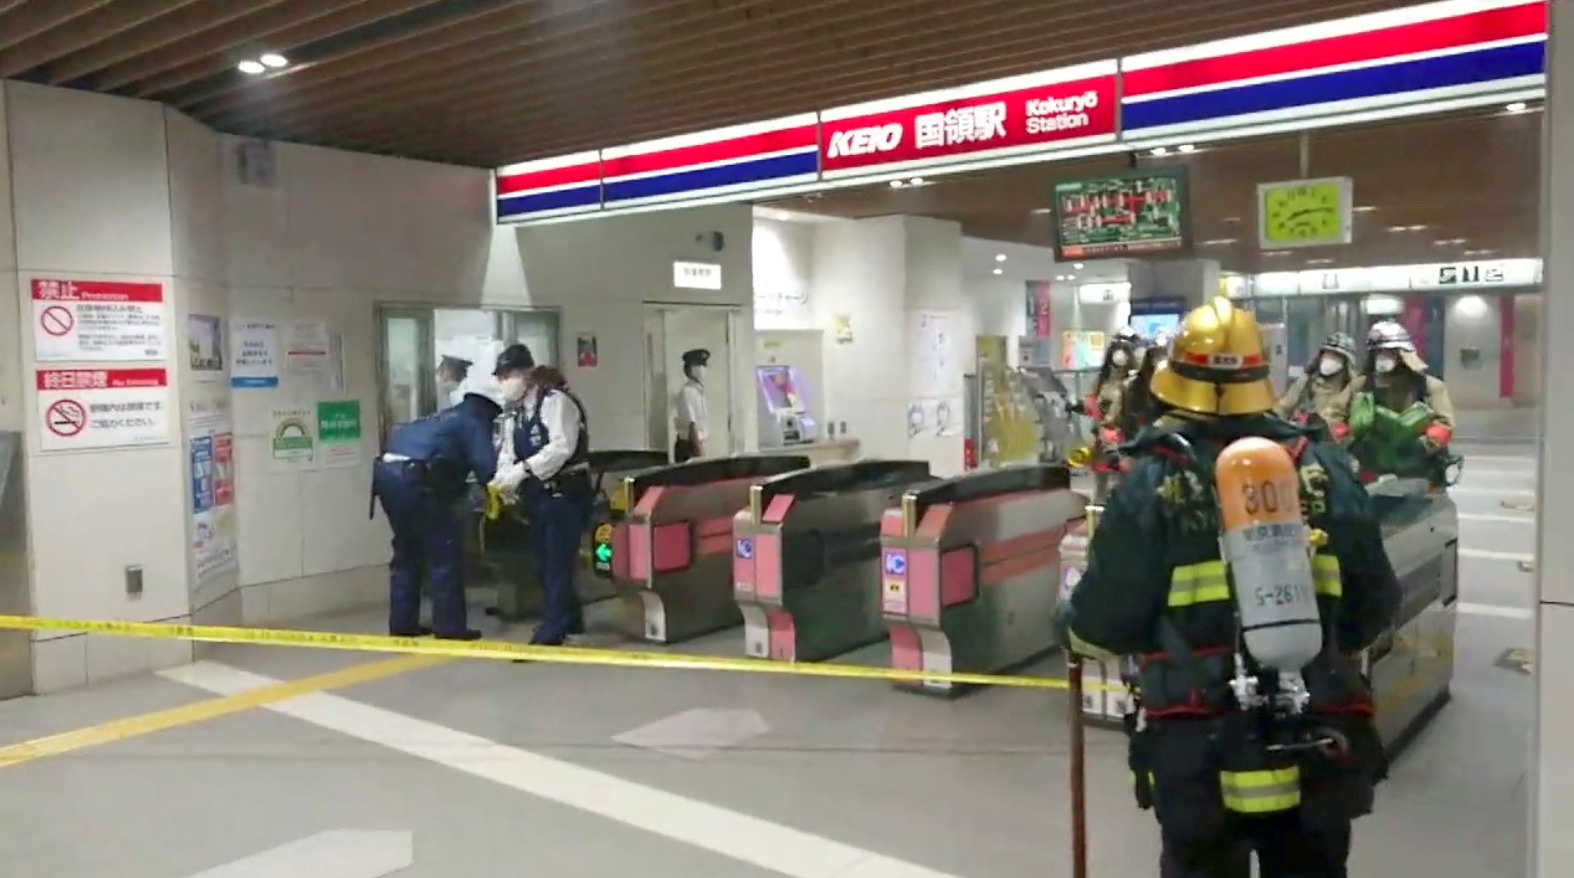 Firefighters and officers work at a Tokyo train station following a knife, arson and acid attack, in Tokyo, Japan October 31, 2021 in this still image obtained from a social media video. TWITTER / @SIZ33/via REUTERS THIS IMAGE HAS BEEN SUPPLIED BY A THIRD PARTY. MANDATORY CREDIT. NO RESALES. NO ARCHIVES.